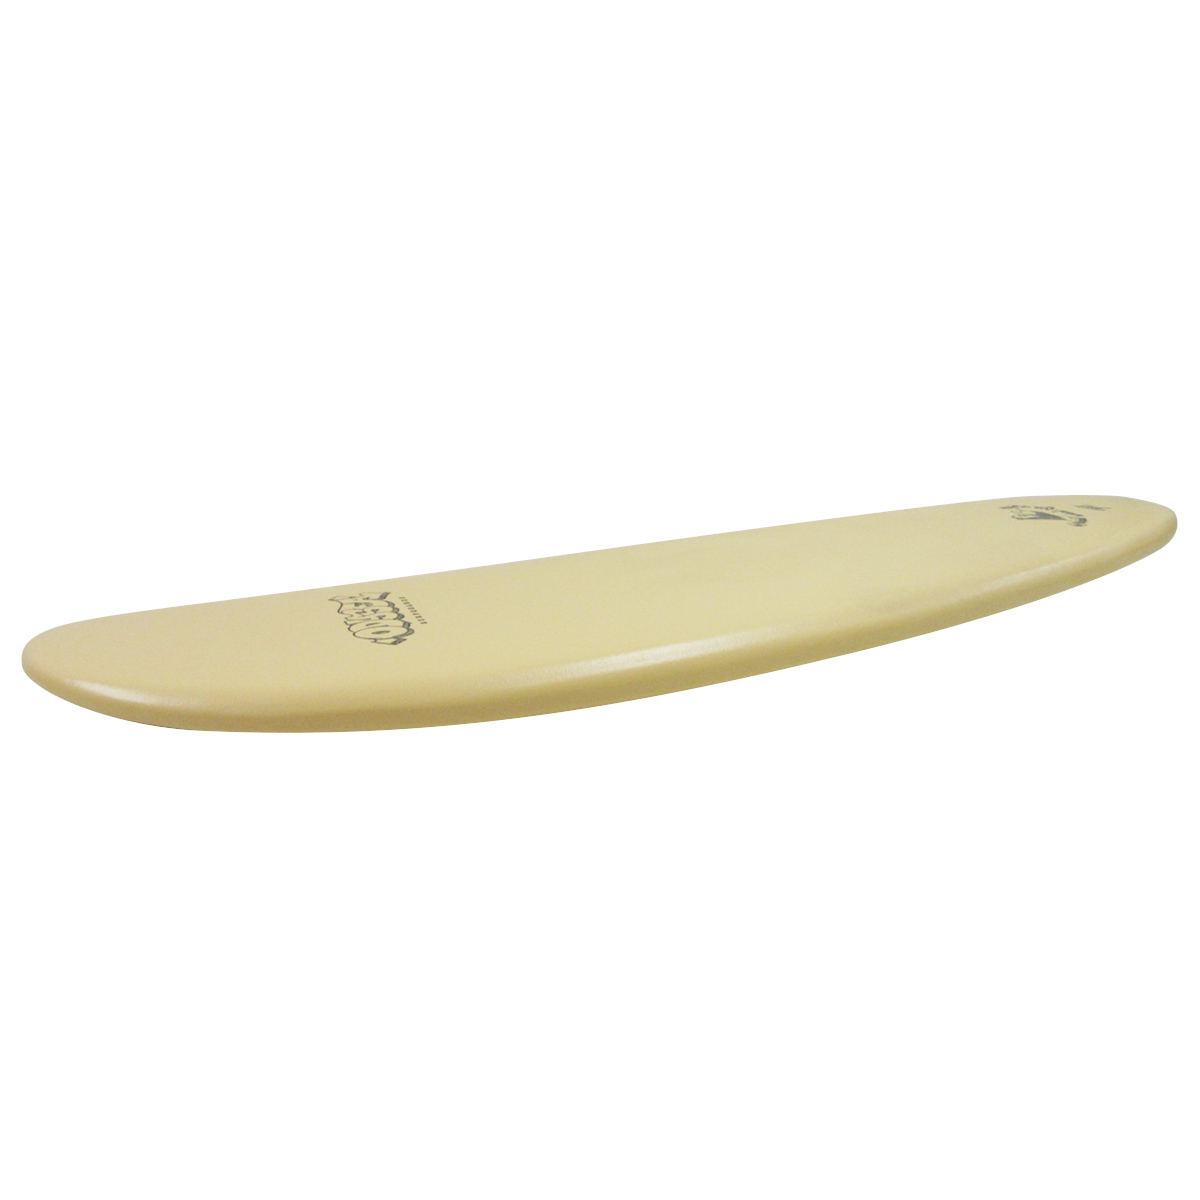 CATCH SURF / Barry McGee Pro 7'0 PLANK